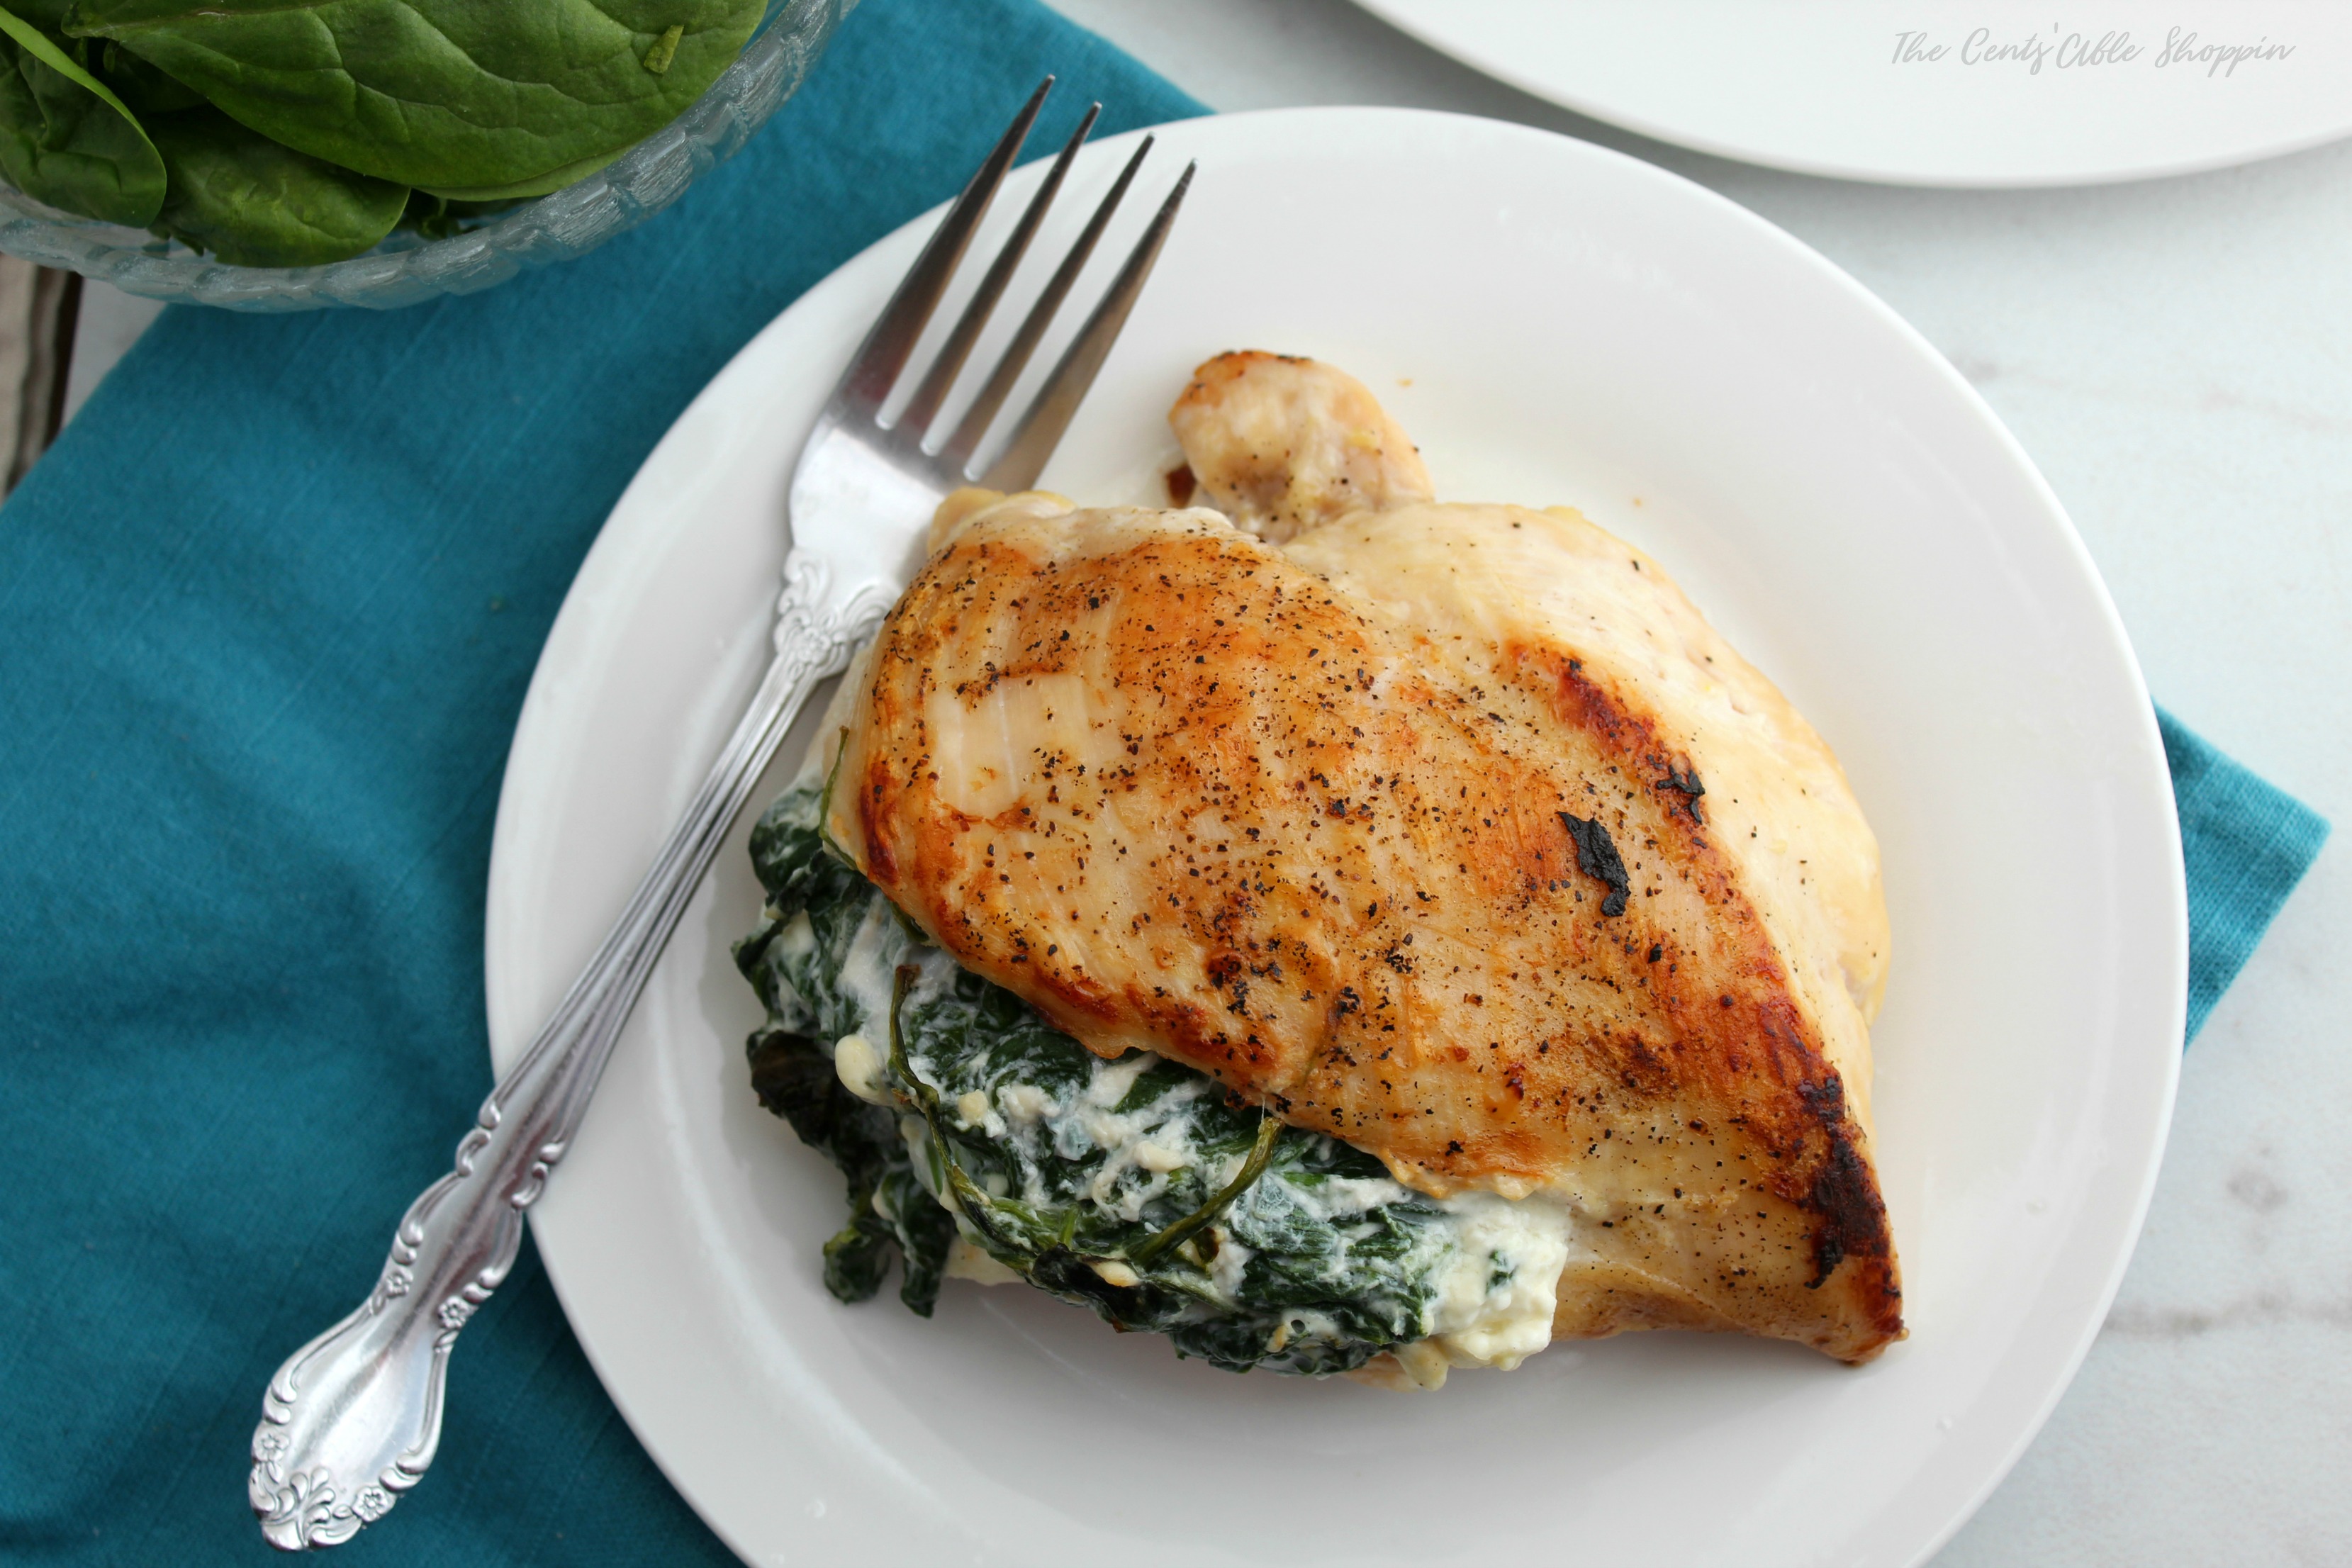 This low-carb Keto Spinach and Feta Stuffed Chicken is a keto-lovers dream! Not only is it easy to make, it's a crowd-pleaser that's also gluten-free!